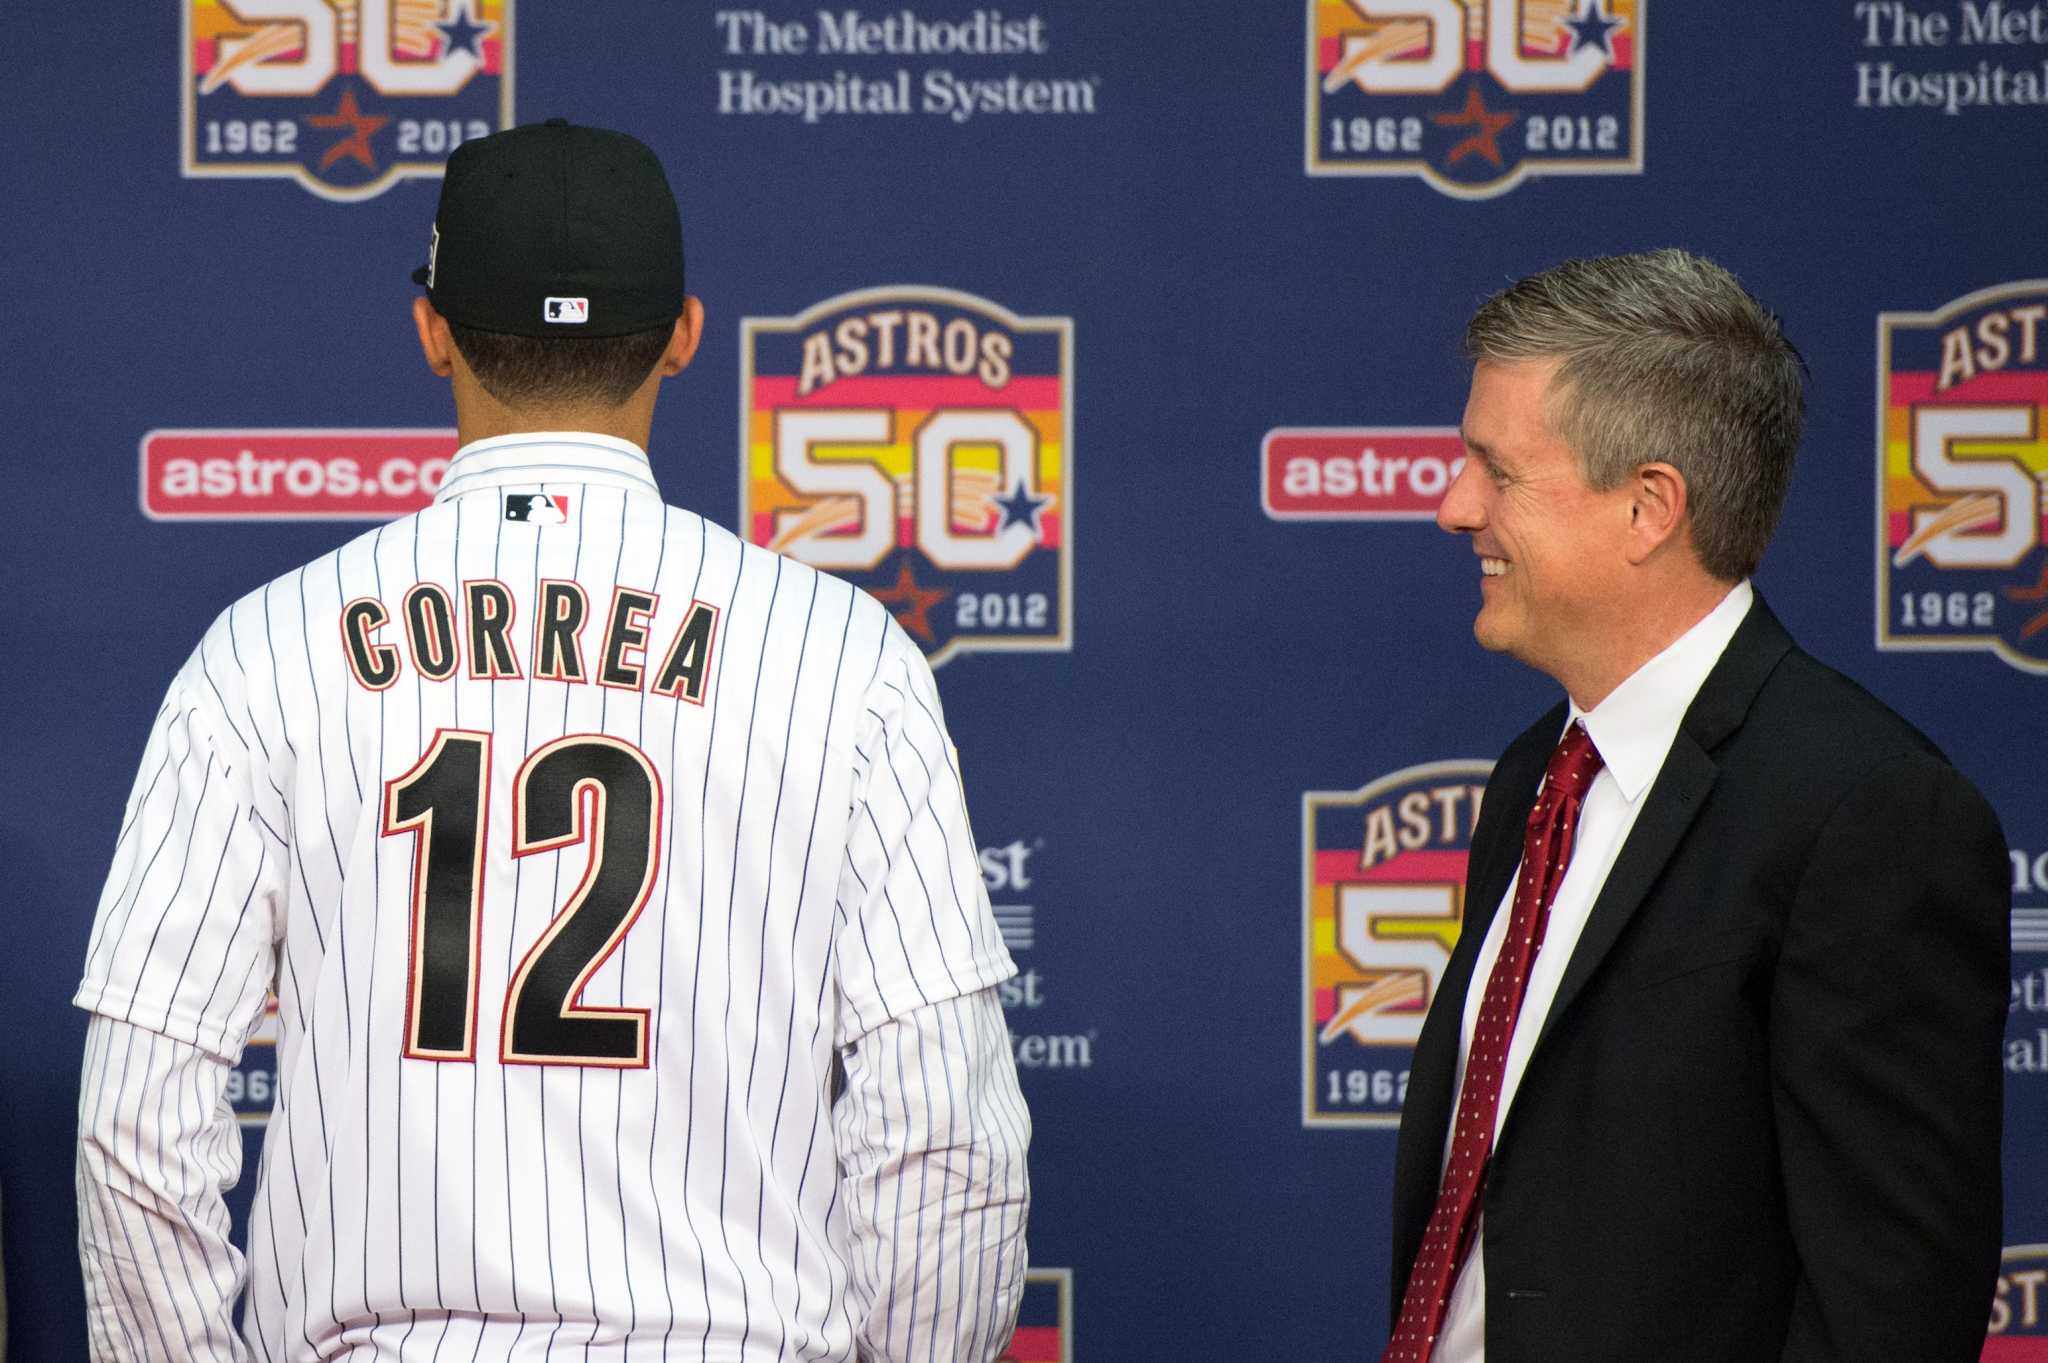 Astros: Revisiting the 2012 amateur draft hits, misses